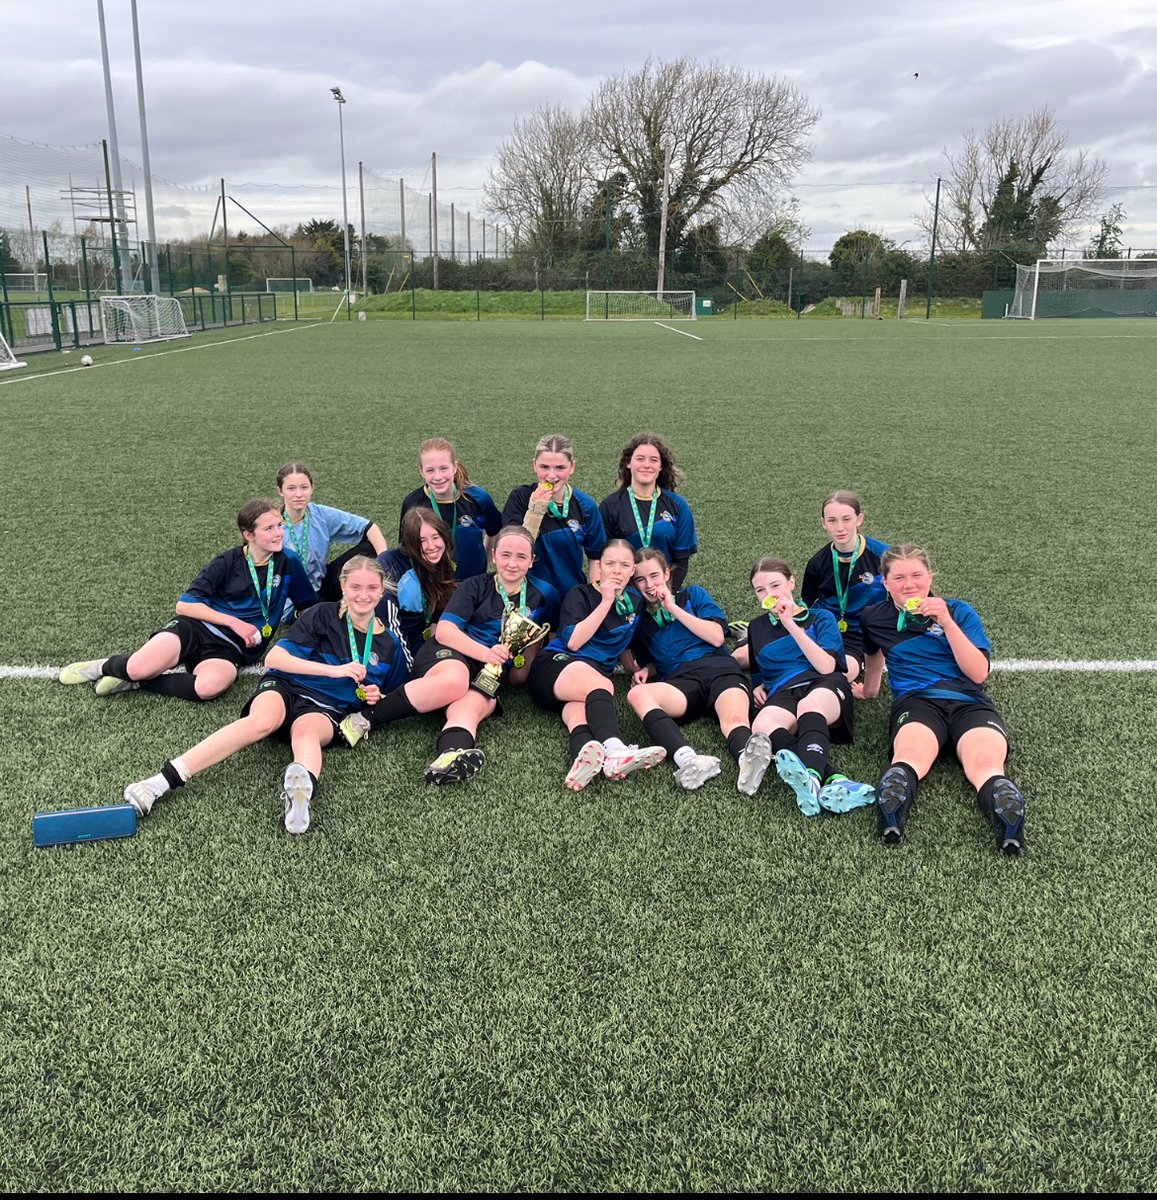 Well done to the Minor girls soccer team who won the final yesterday 3-0. Another cup to add to the cabinet, congratulations to all, we are very proud of you